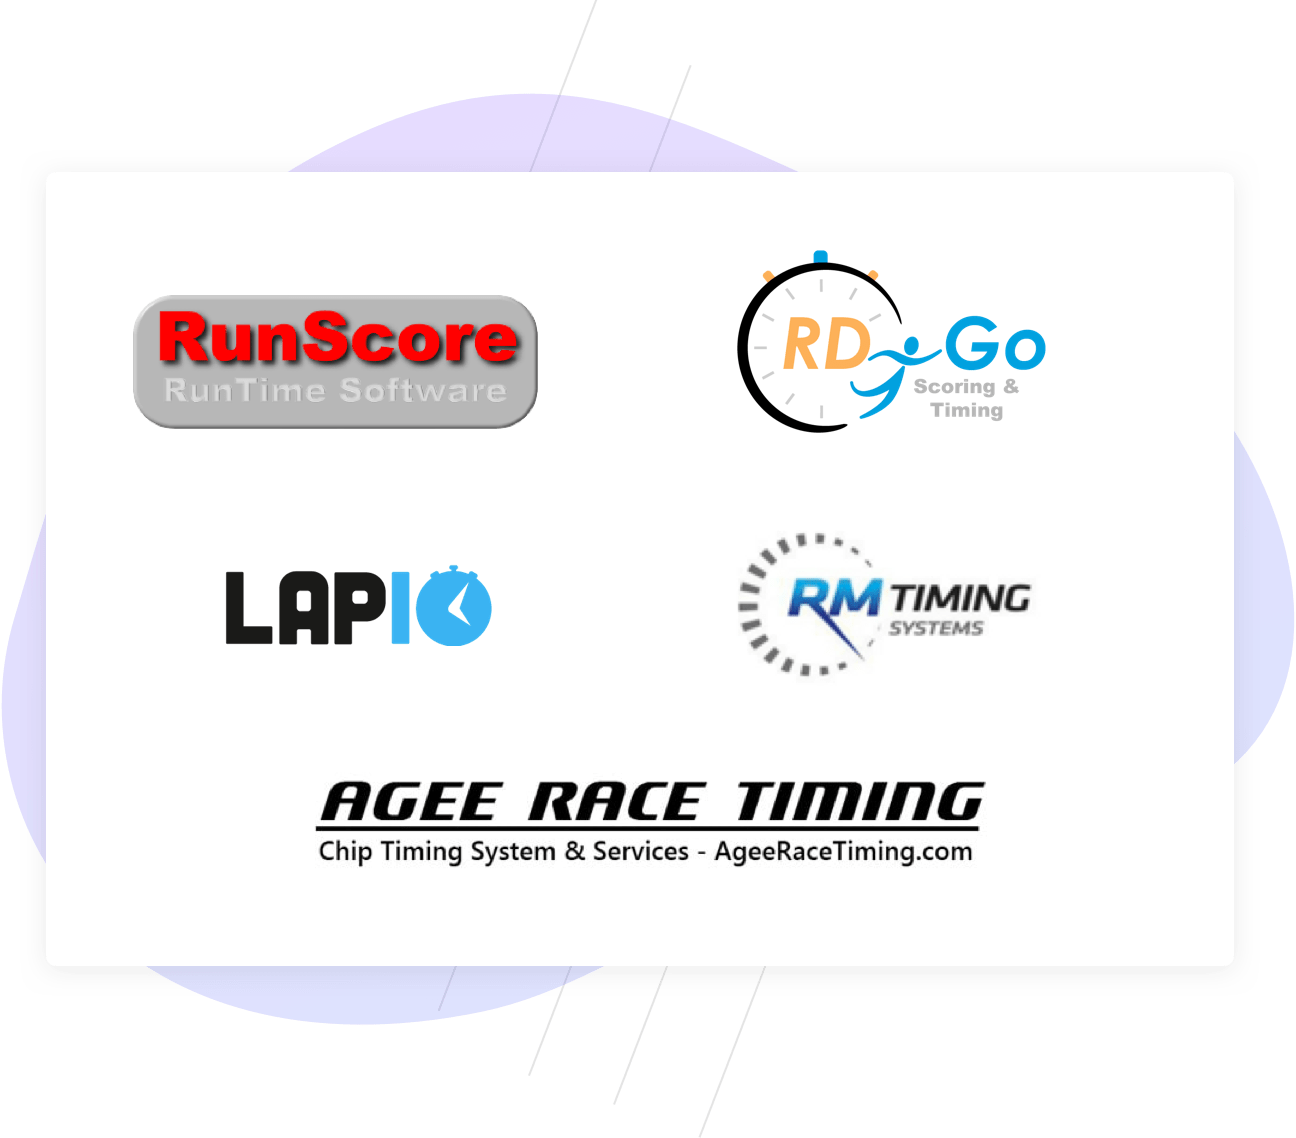 Timing integration logos: RunScore, RD Go, Lap 10, RM timing, and Agee Race Timing